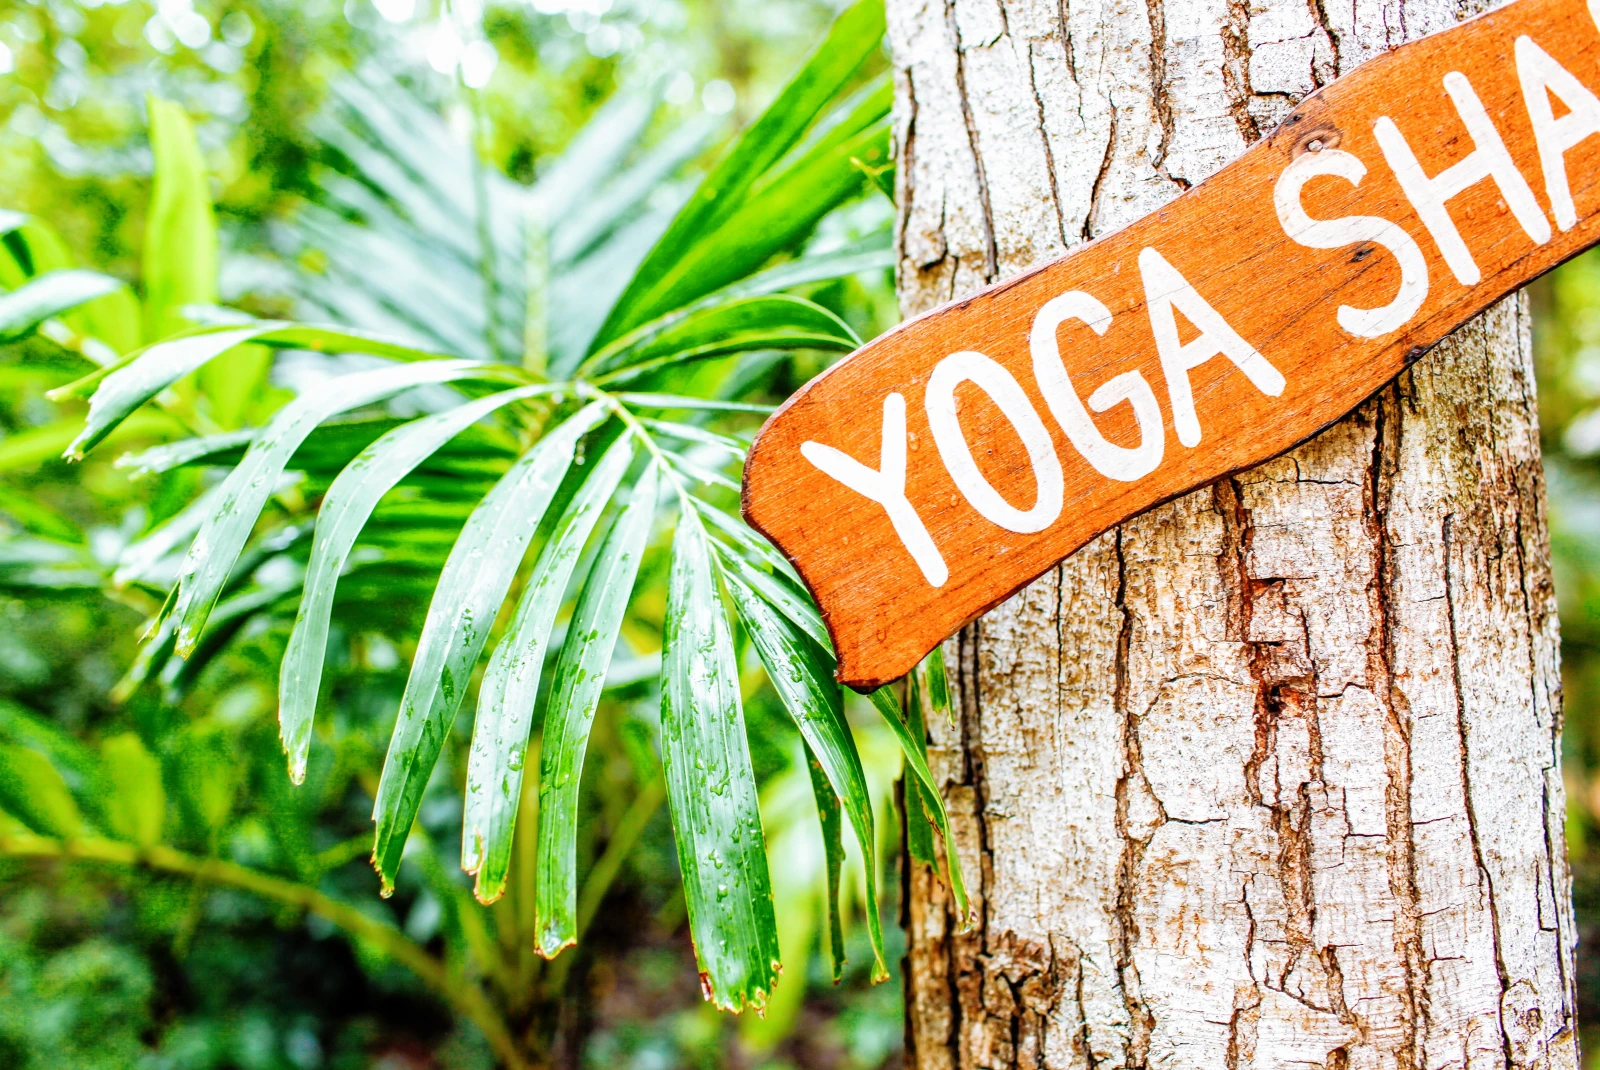 Yoga Shala sign on tree in Tulum, Mexico